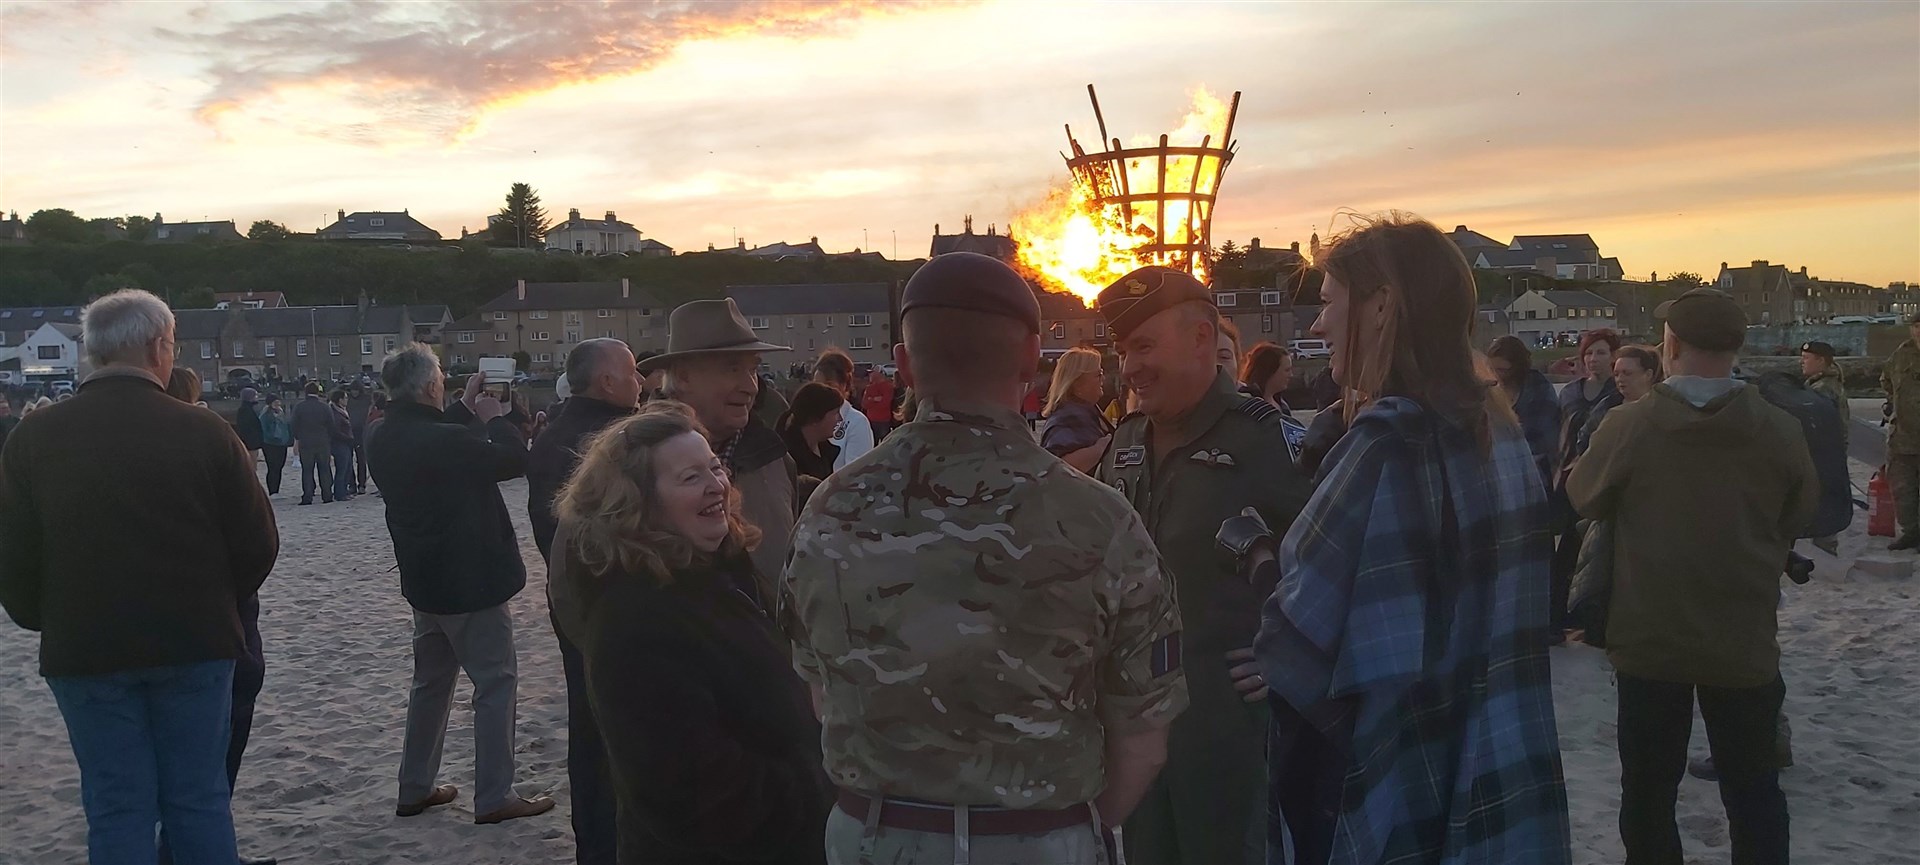 Group Captain Chris Layden, Station Commander of RAF Lossiemouth, with the beacon in the background.